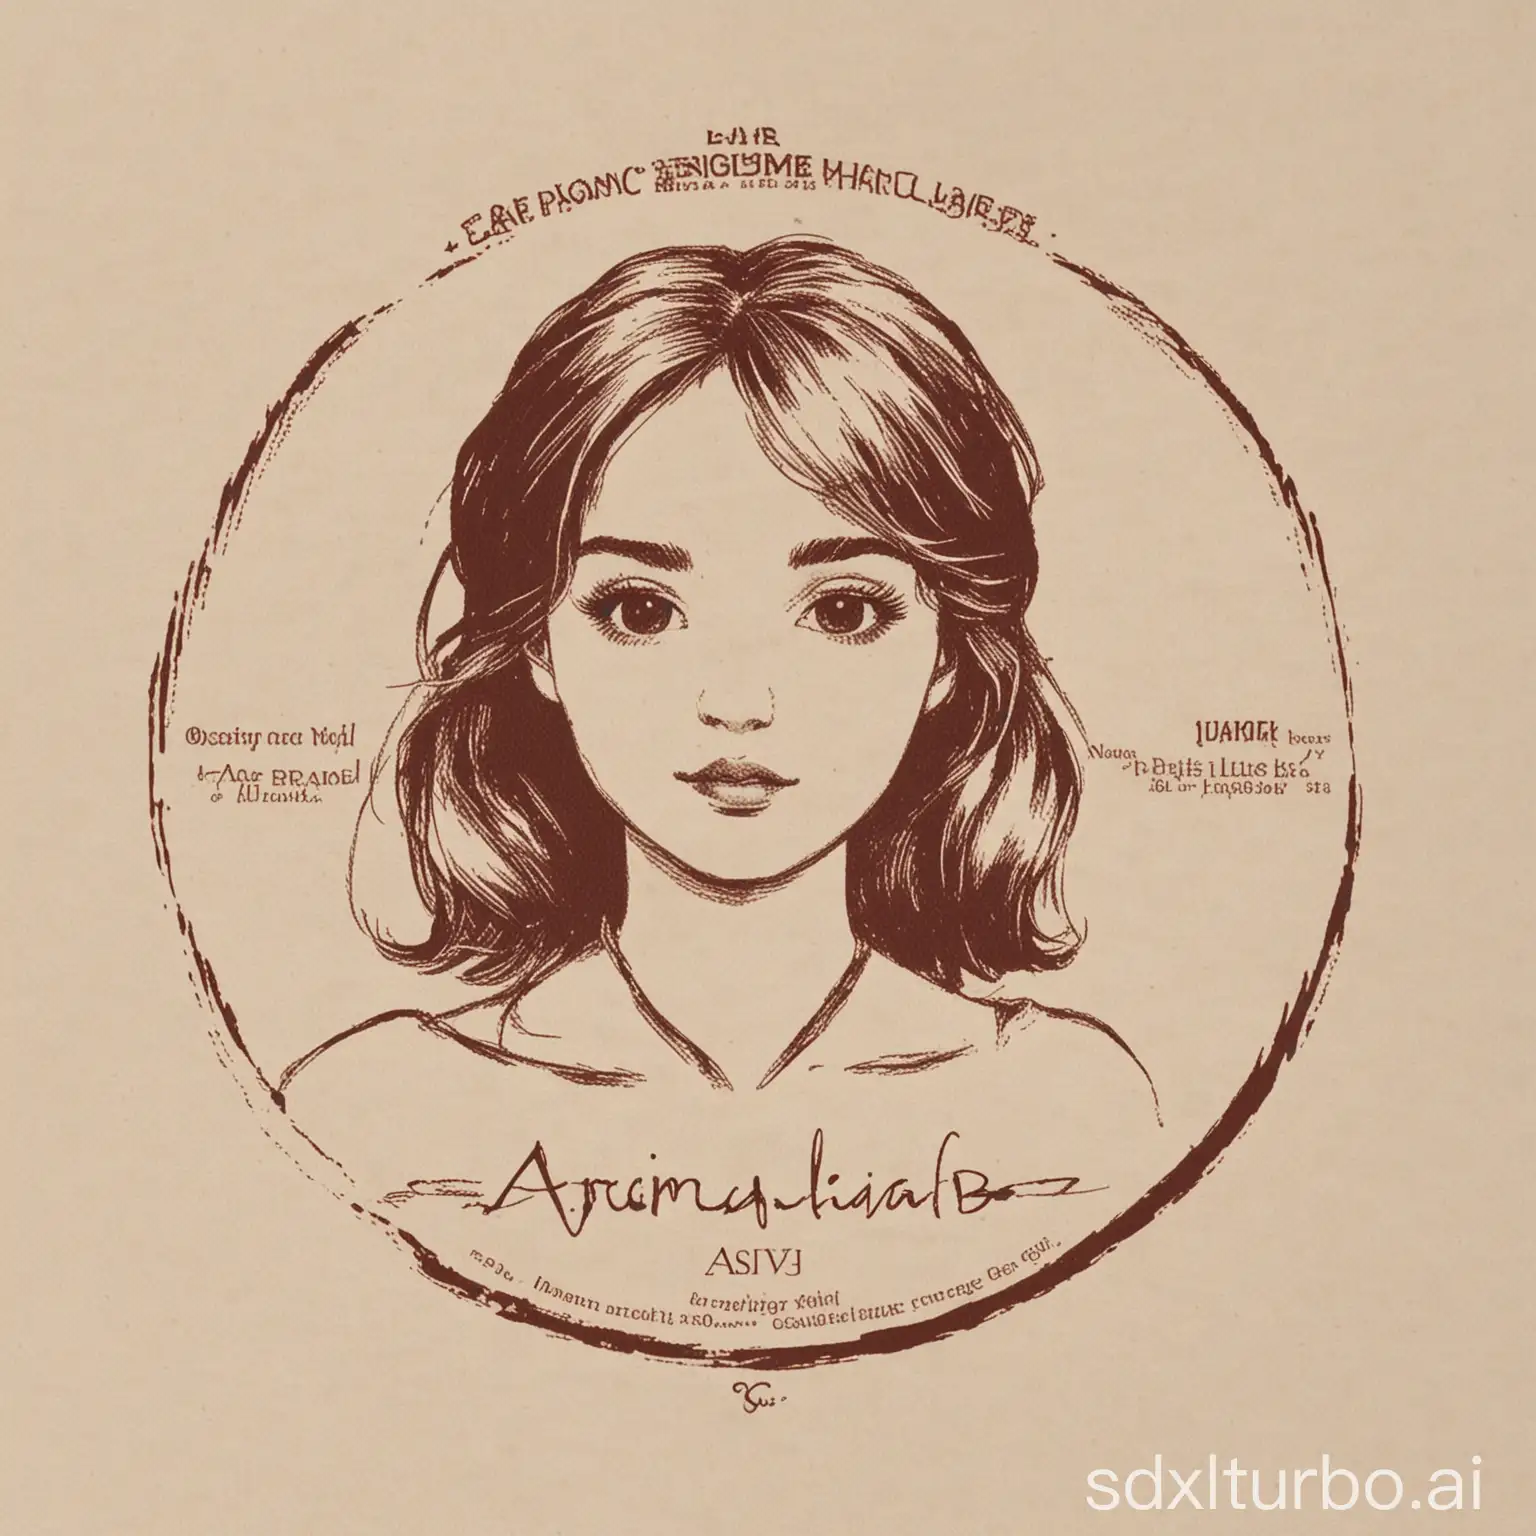 An aromatherapy label, all the content is confined to an area of 2.5cm*2.5cm; the layout of the organization of the upper middle and lower part: the upper part, the brand Logo ‘AromaLab’; the middle part, the head of the American girl in a sketch; the lower part, the name of the fragrance “Poison Girl